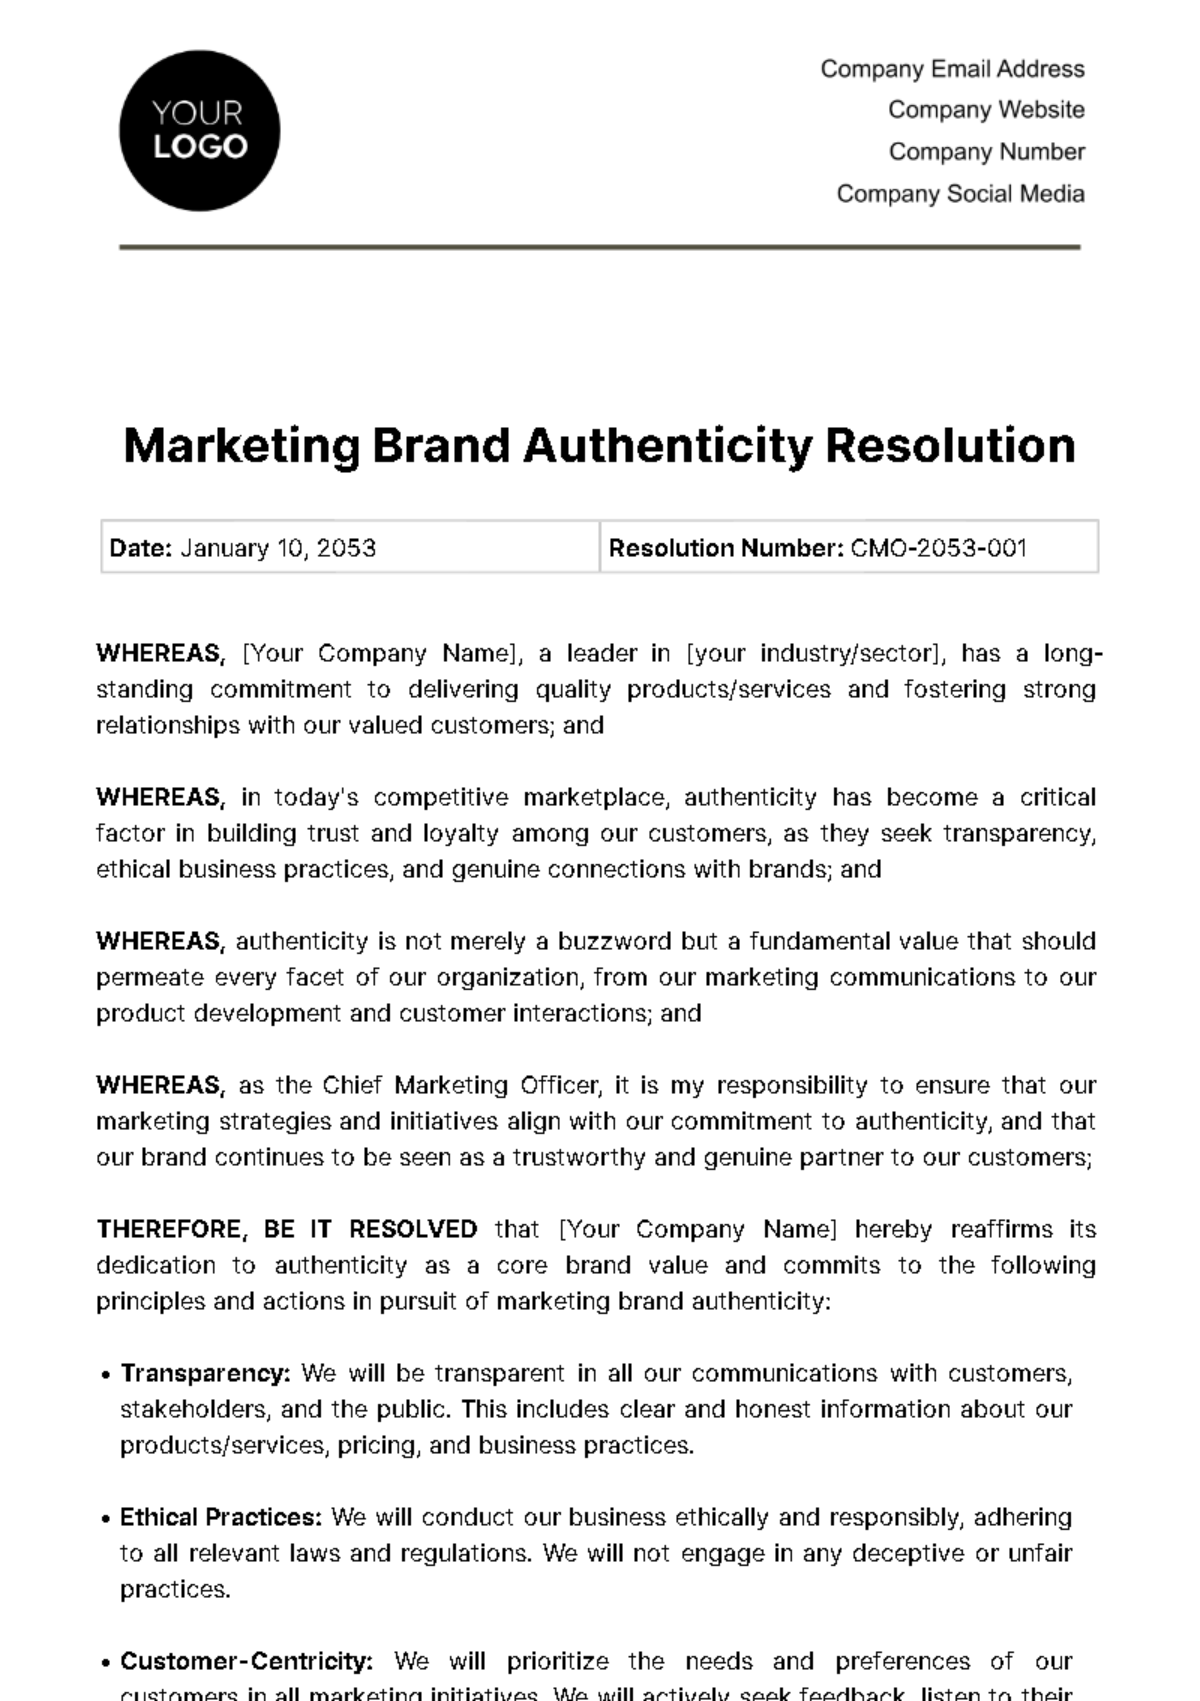 Marketing Brand Authenticity Resolution Template